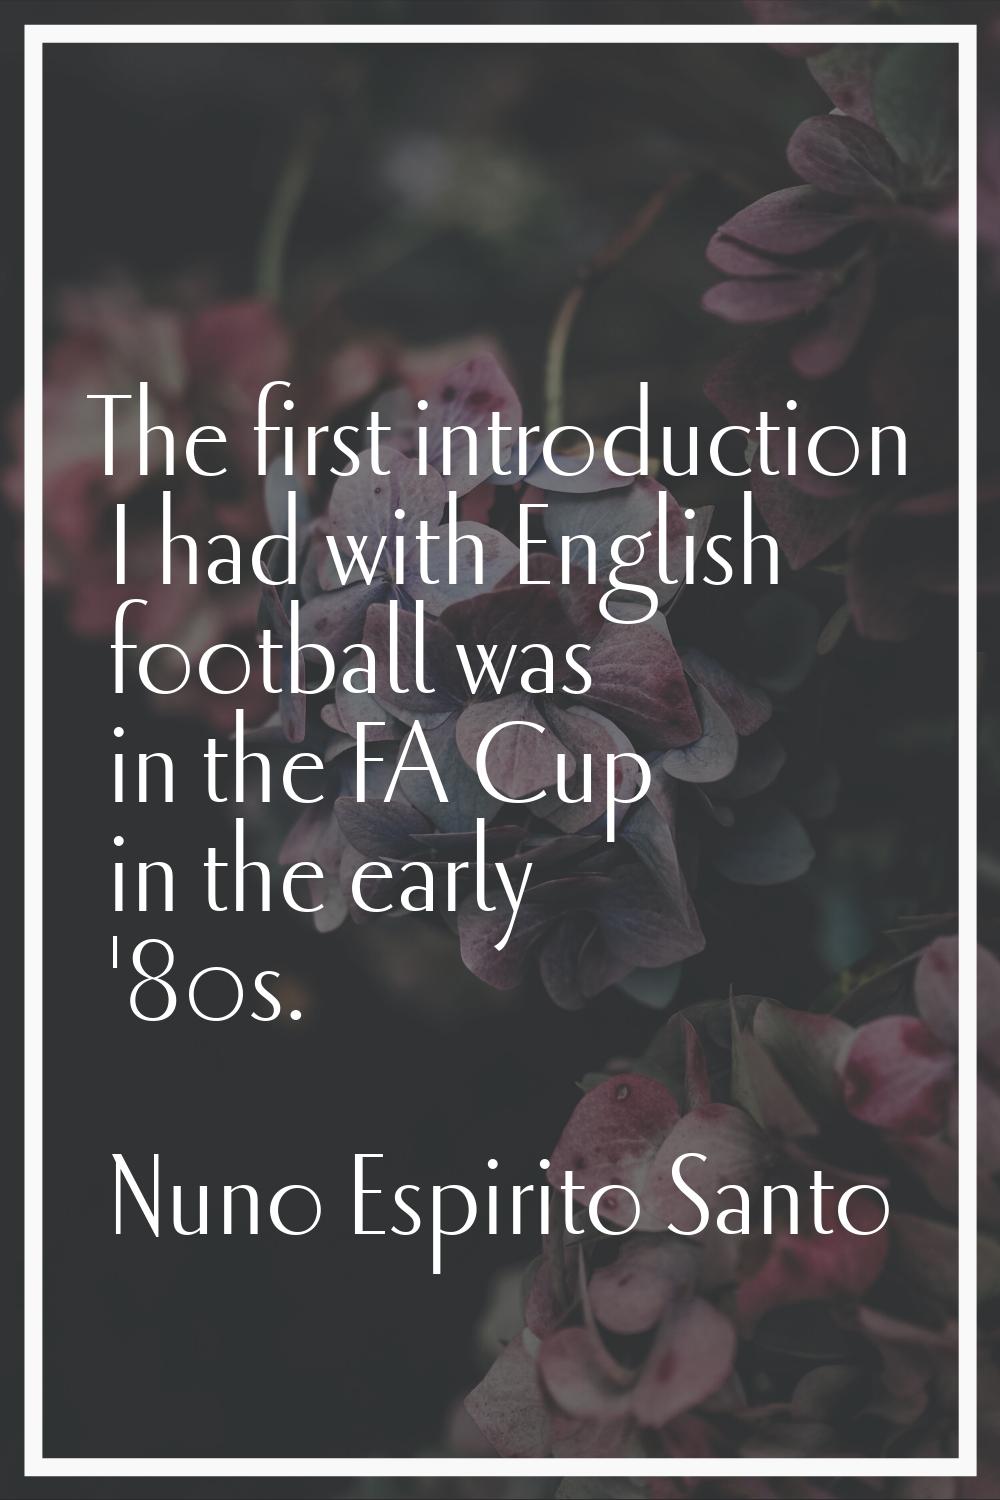 The first introduction I had with English football was in the FA Cup in the early '80s.